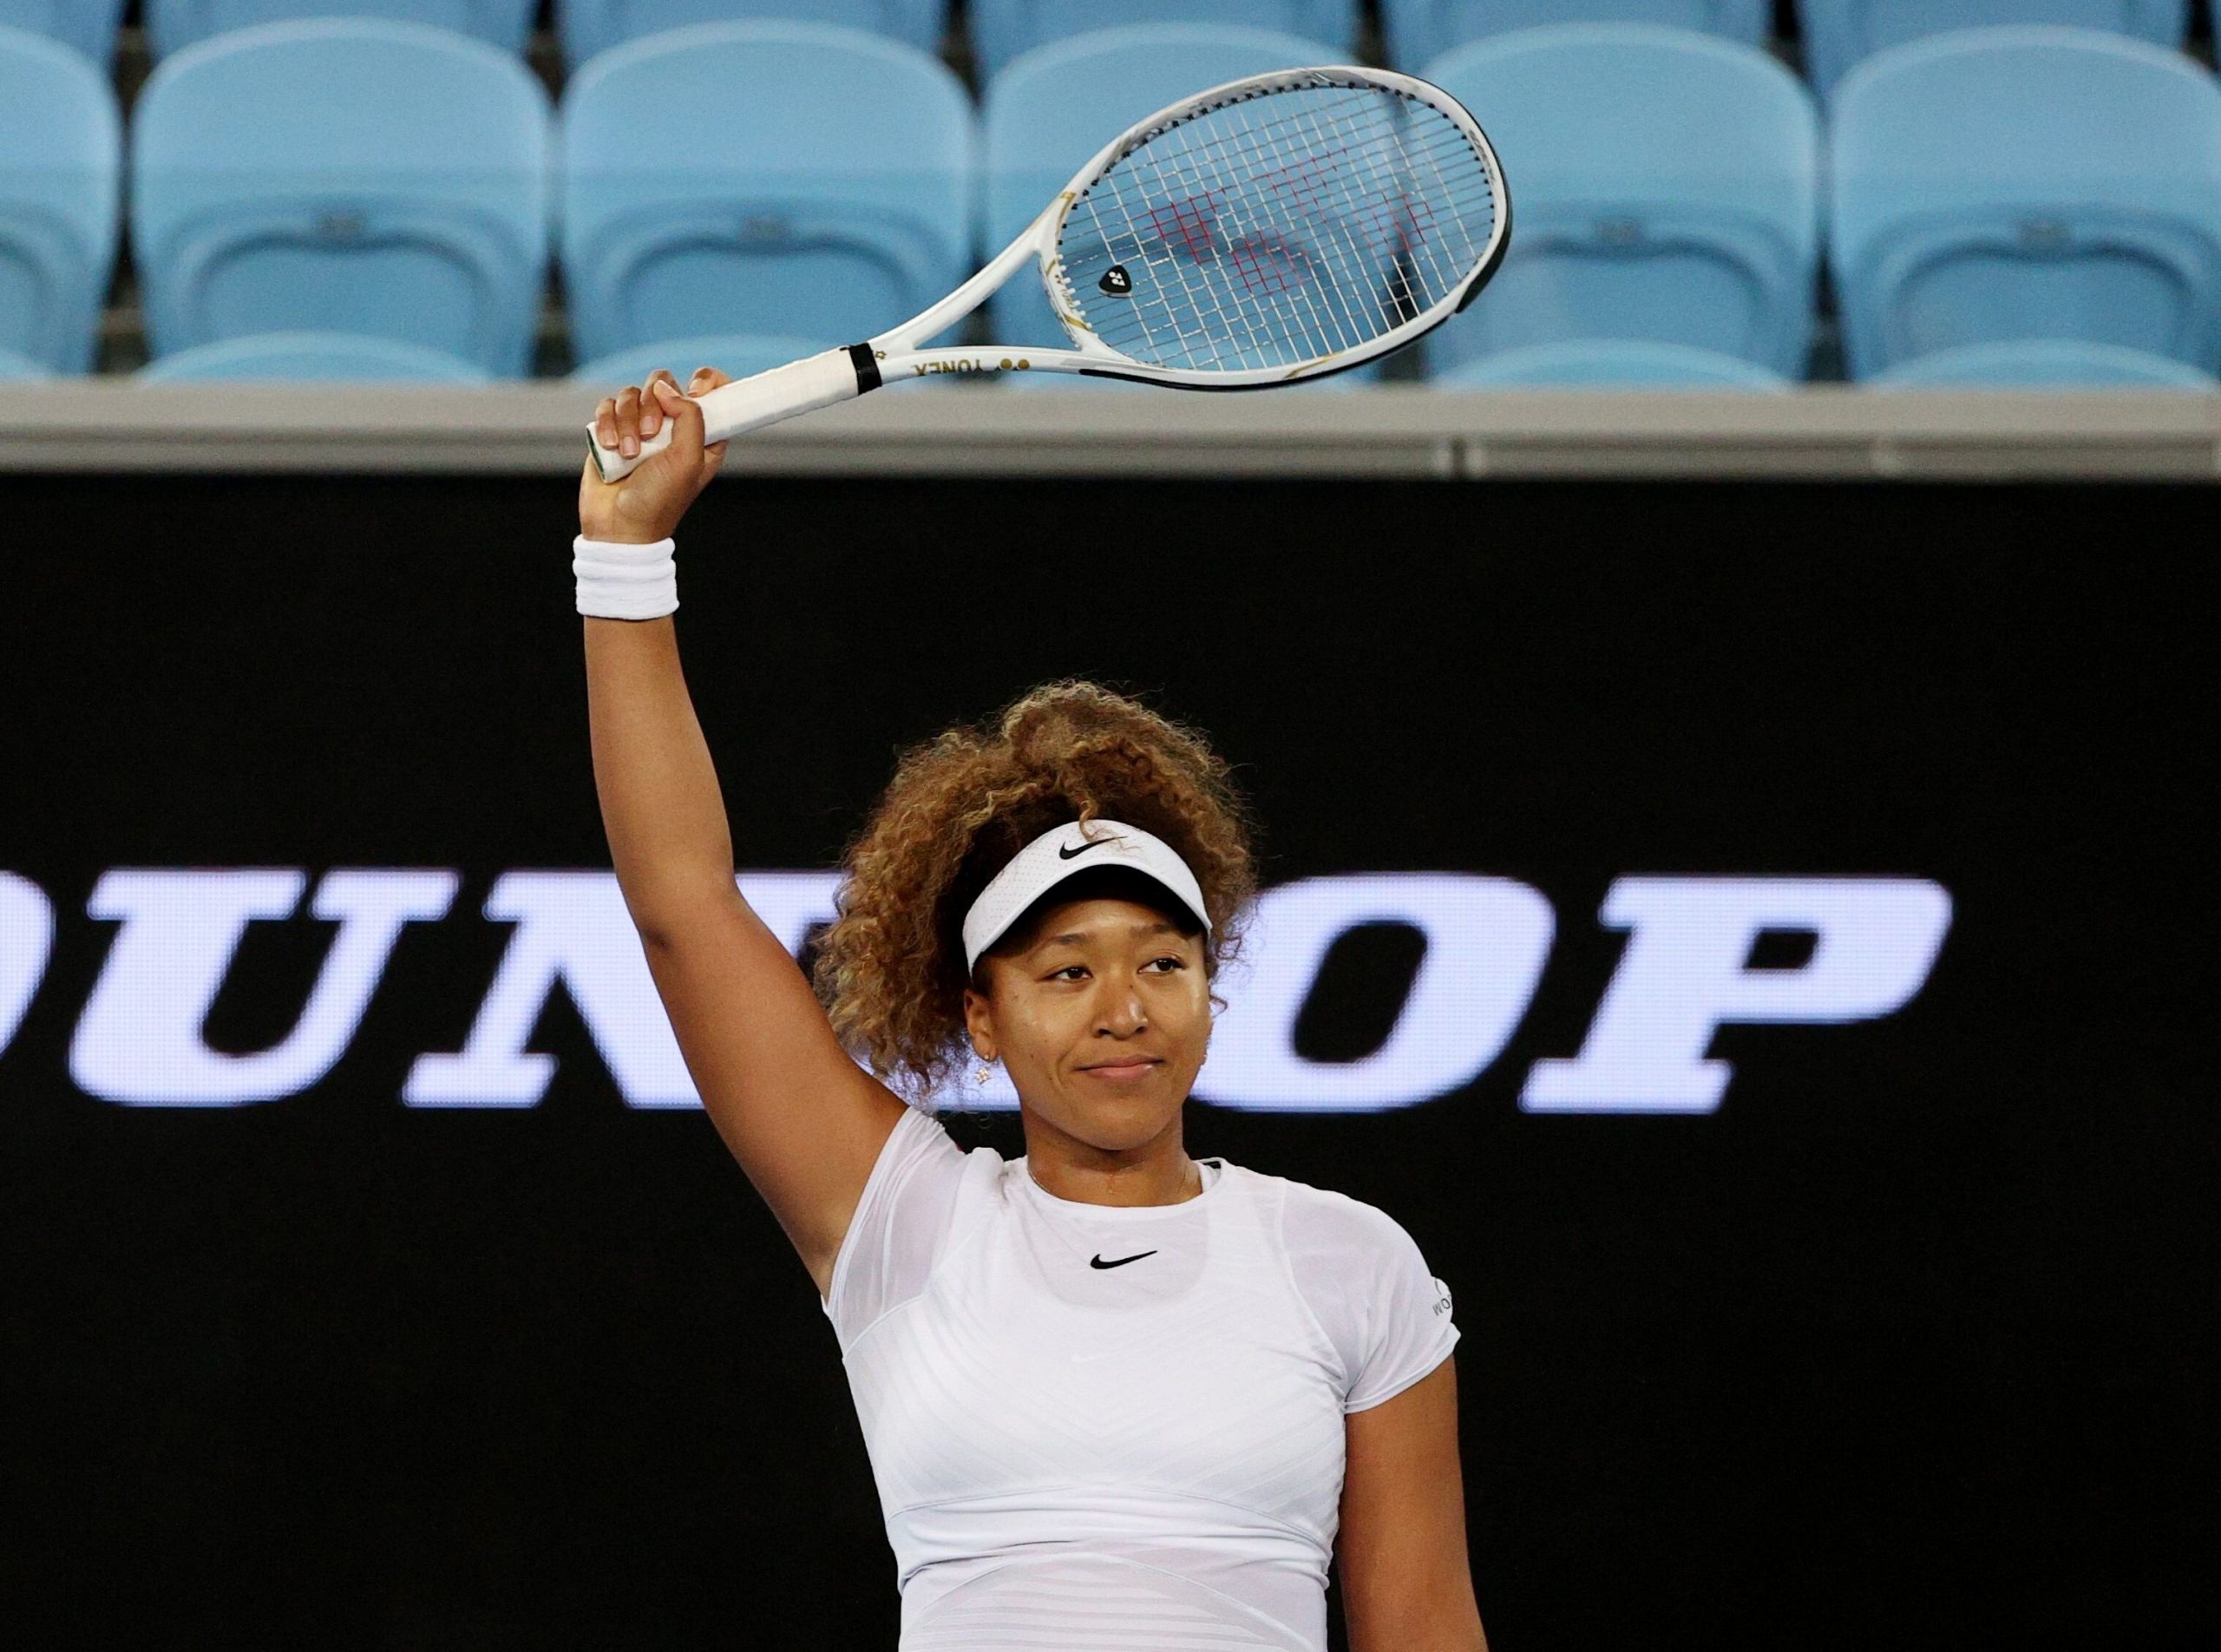 Japan's Naomi Osaka Withdraws from Melbourne Semi-Finals